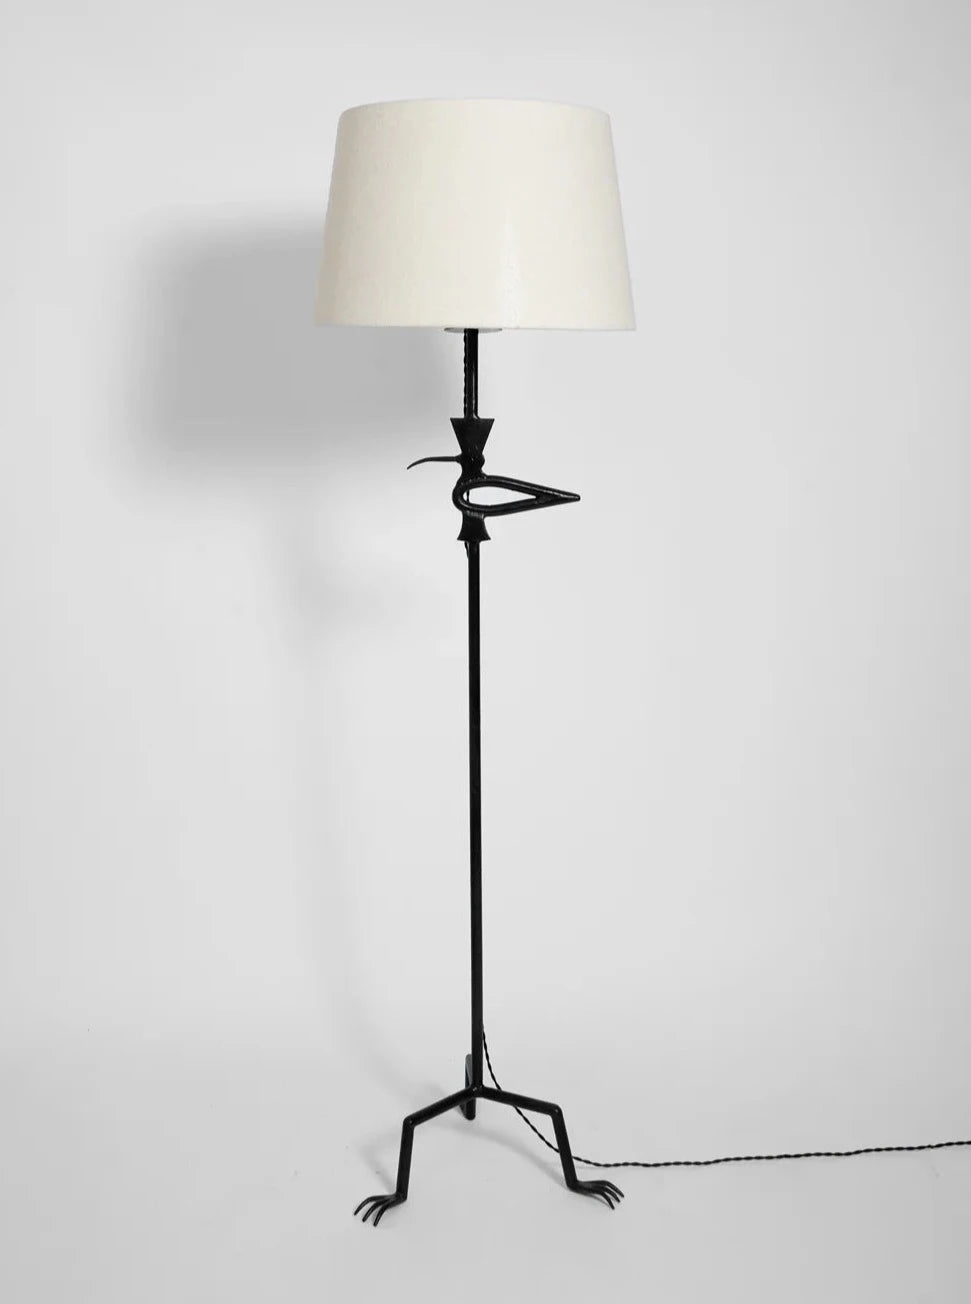 Brejos Floor Lamp standing tall in contemporary living room setting